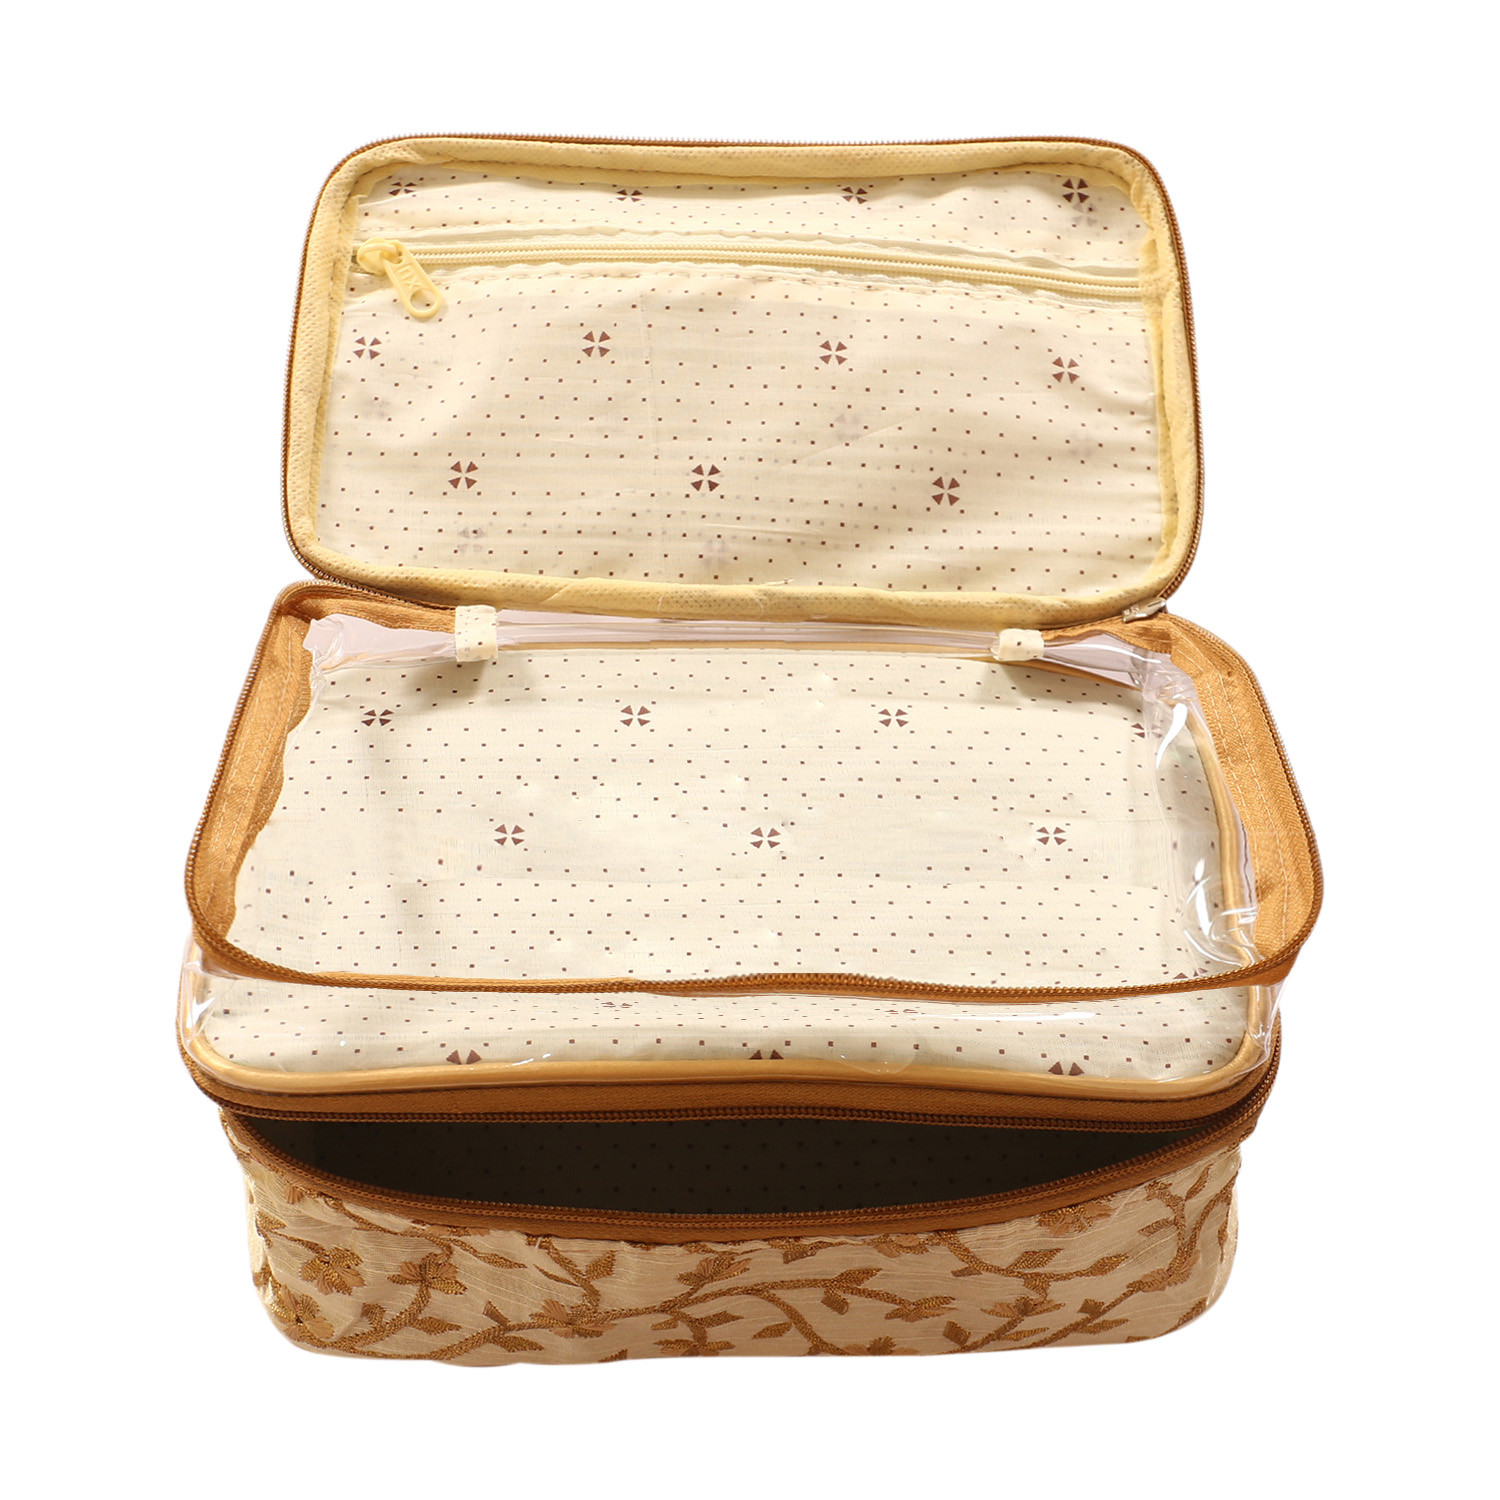 Kuber Industries PVC Embroidery Design Travel Jewellery Organizer|Cosmetic Utility Kit With 2 Compartment And Inside Pocket  (Cream)